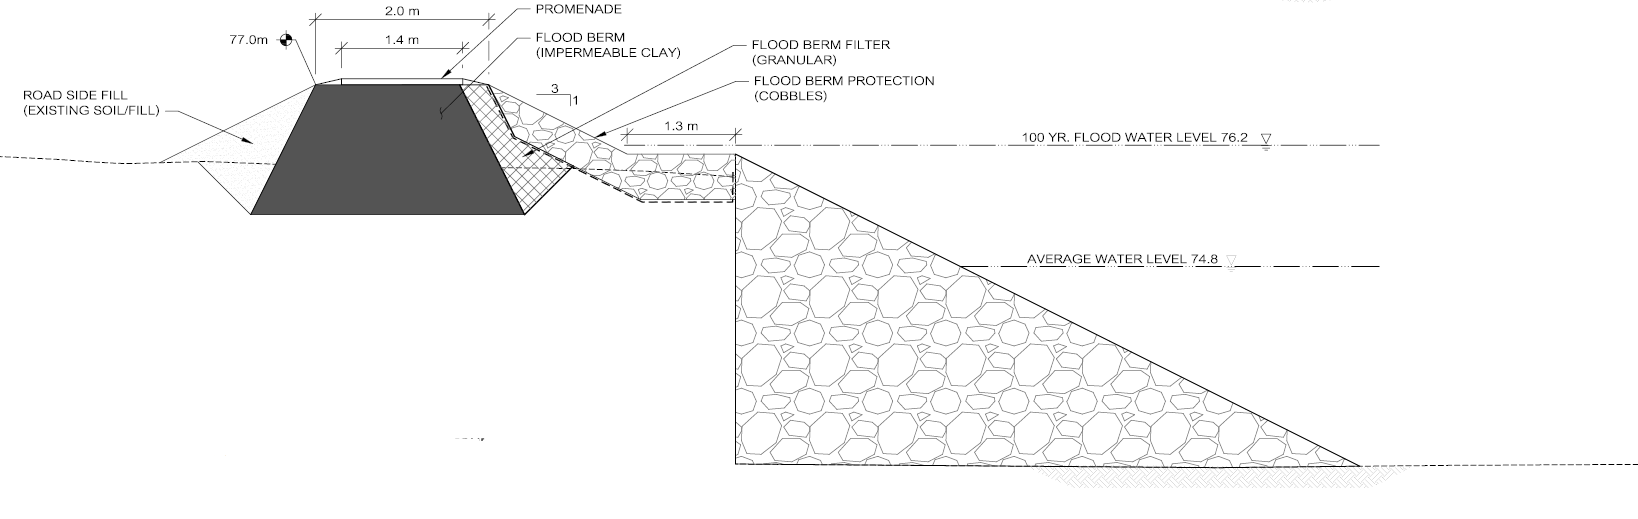 Cross-section of a revetment treatment with backshore berm option with a clay core.